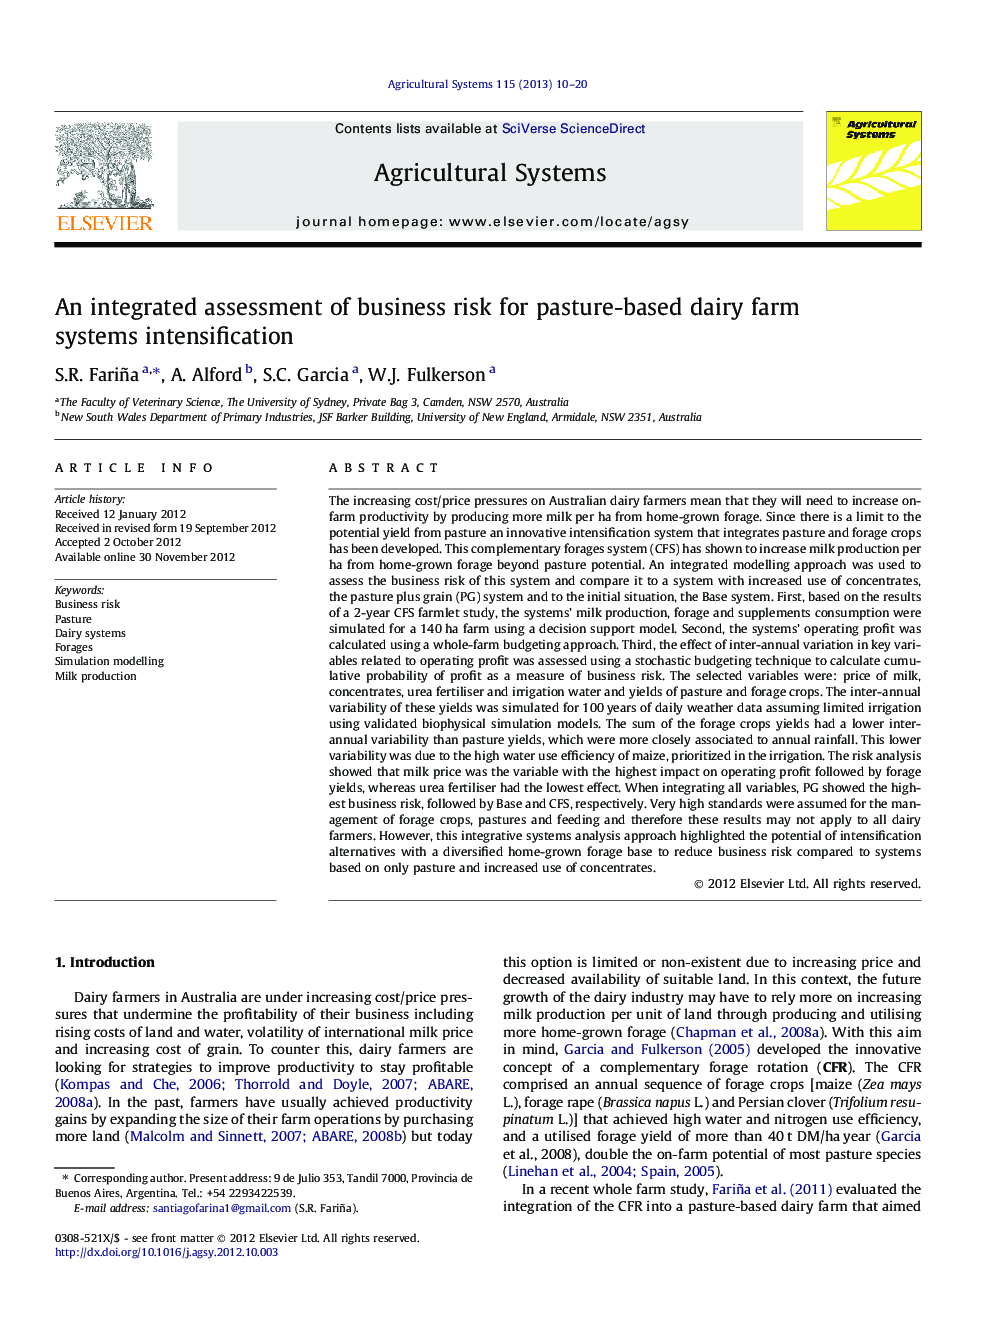 An integrated assessment of business risk for pasture-based dairy farm systems intensification